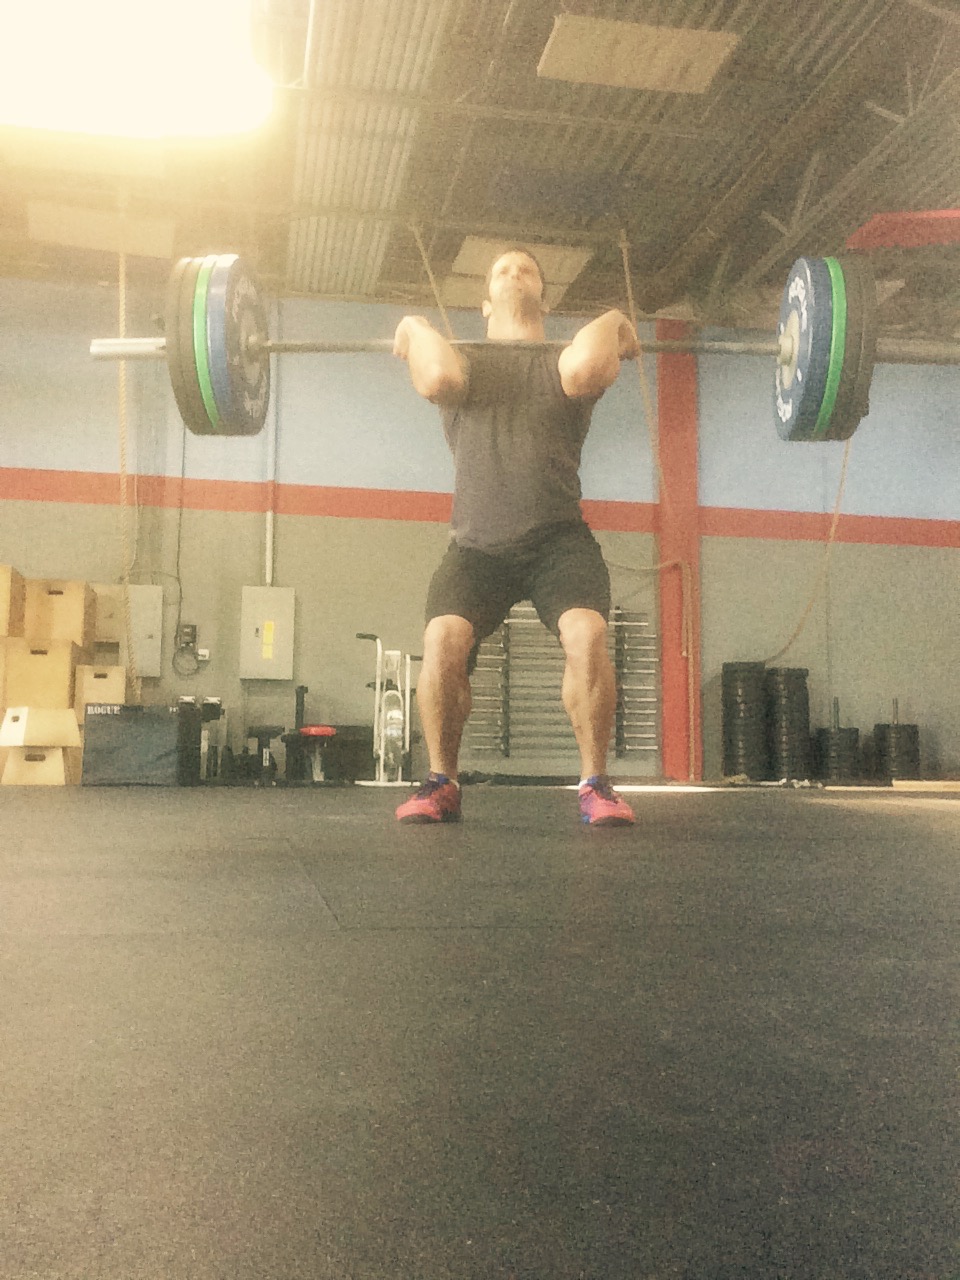 Lance is continuing to set PRs each week as he hits week 4 of using Thrust.